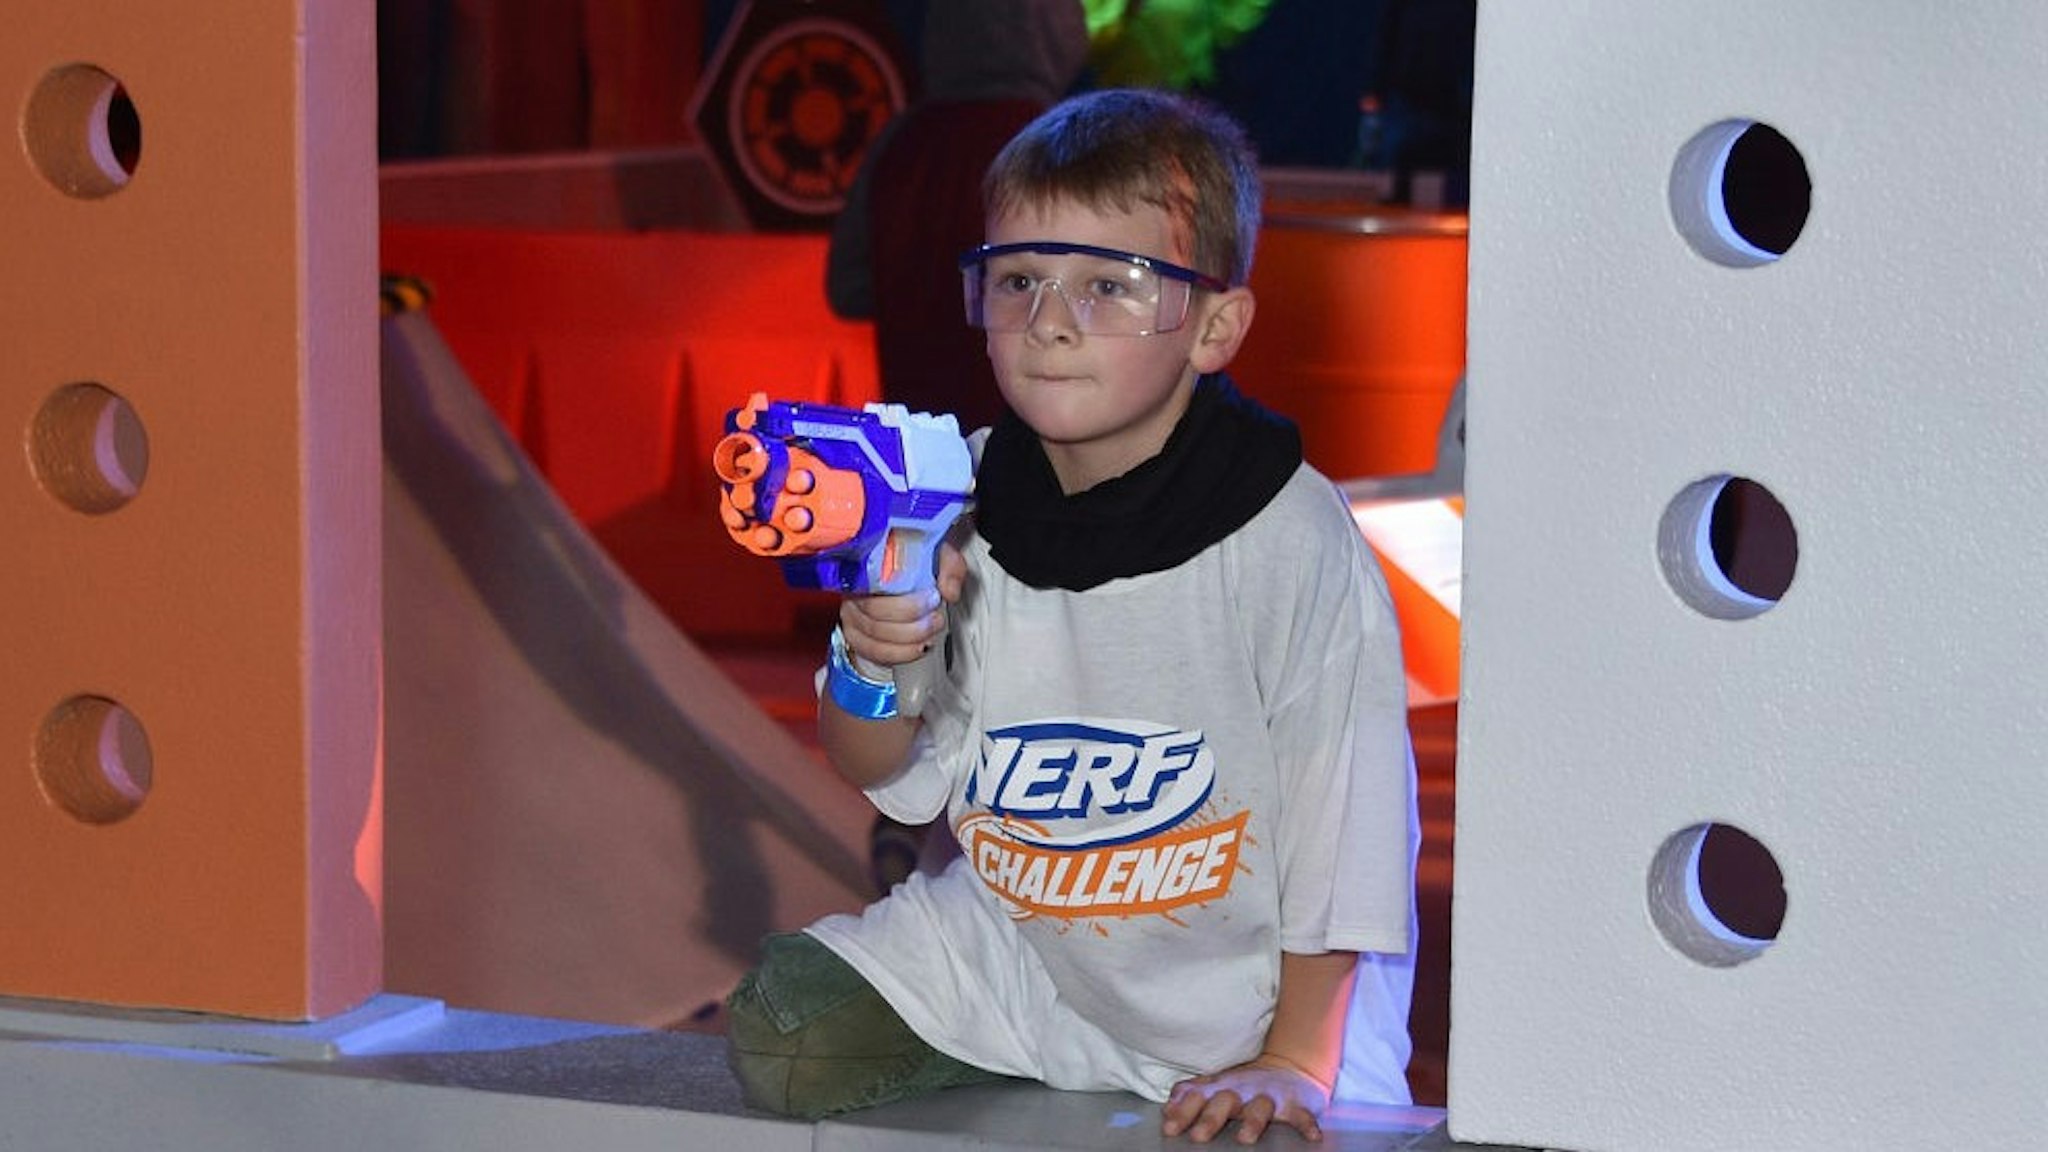 LOS ANGELES, CALIFORNIA - DECEMBER 5: A young guest attends the NERF Challenge World Premiere at L.A. Live Event Deck on December 5, 2019 in Los Angeles, California. NERF Challenge is a touring live stage and fan experience that brings the action and competitive fun of the NERF brand to life, and will travel across select US and Canada markets in 2020 following its Los Angeles run.